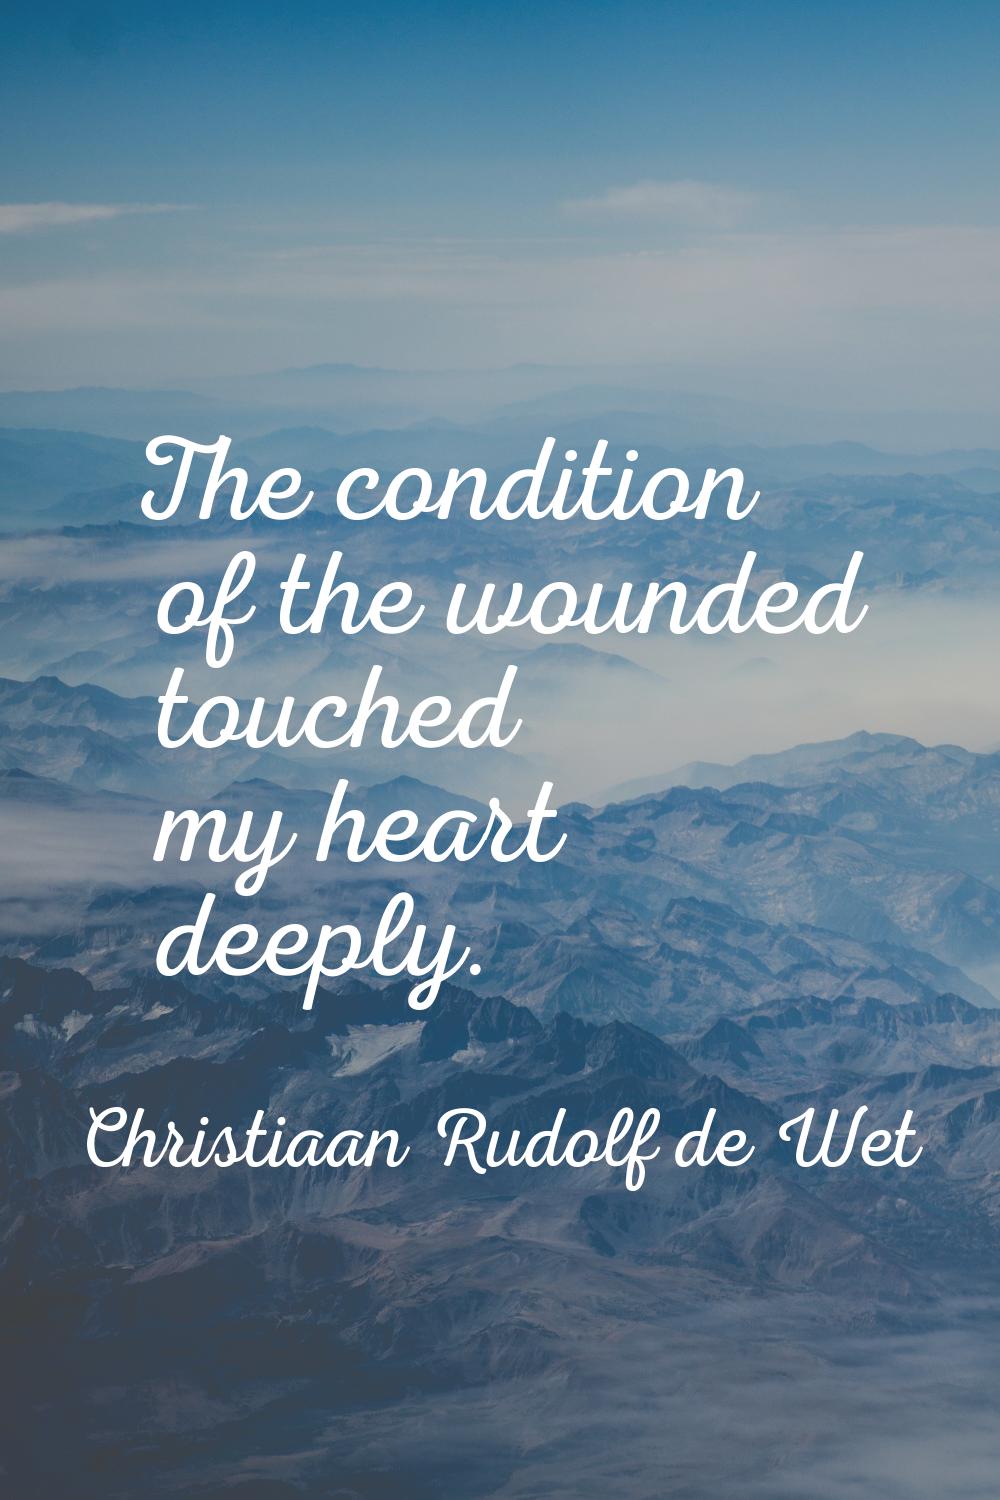 The condition of the wounded touched my heart deeply.